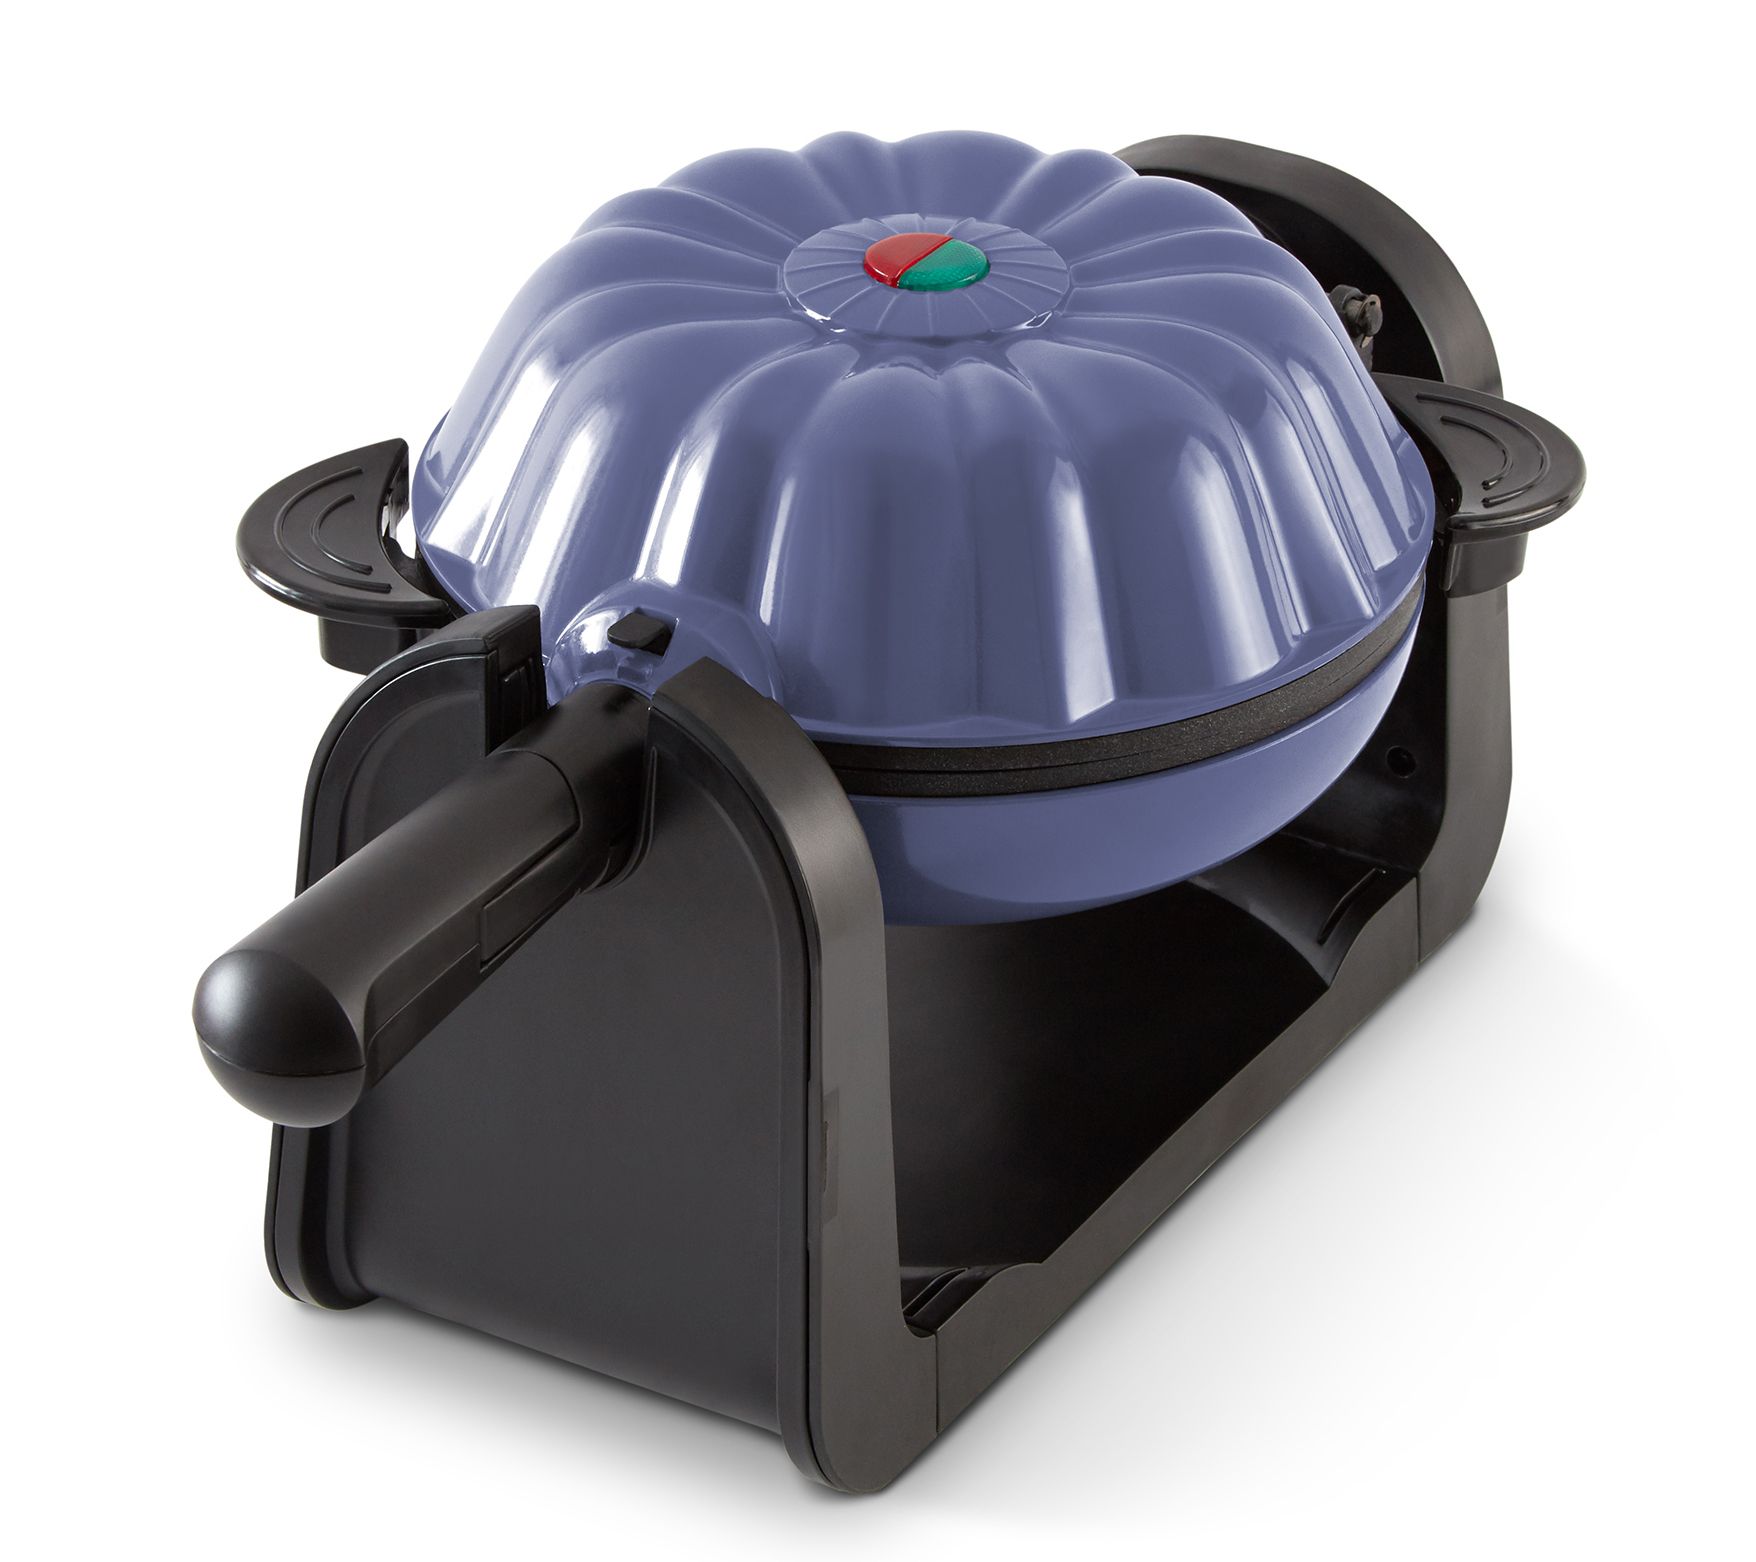 Newest Quality Electric Rotating Lava Bundt Cake Maker Rotated